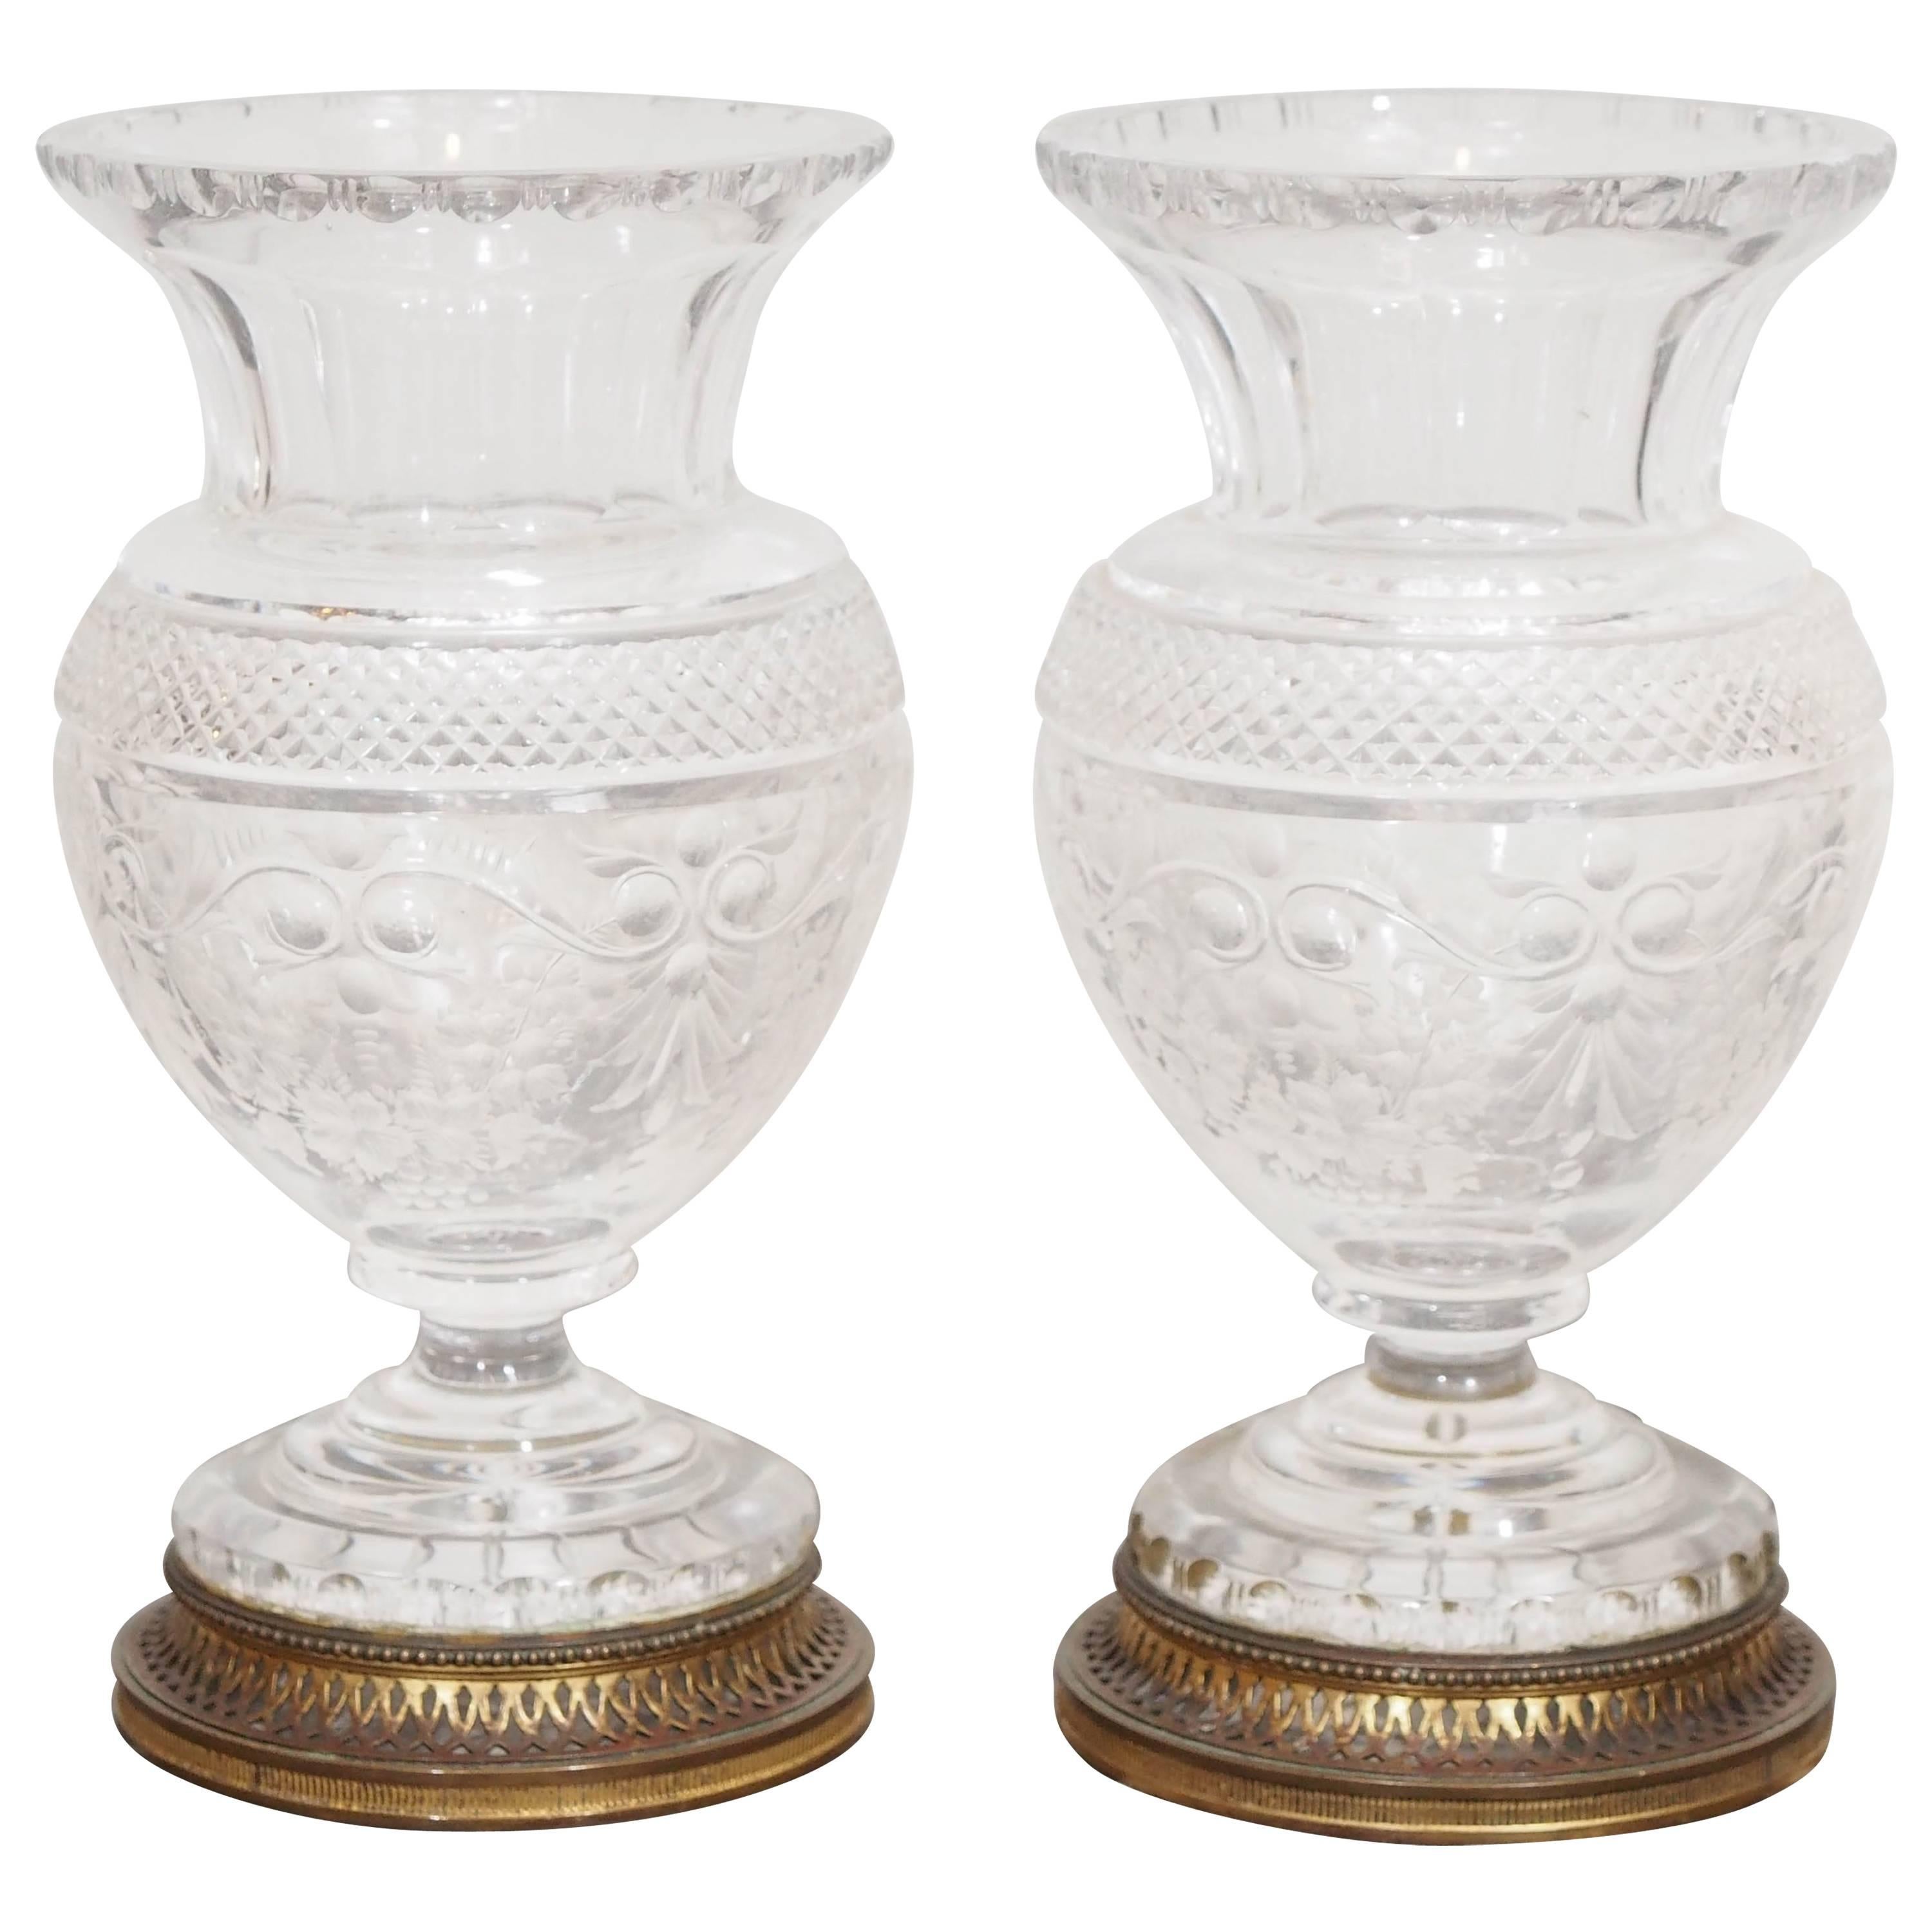 Pair of French Baccarat Cut-Glass Vases with Bronze Mounts